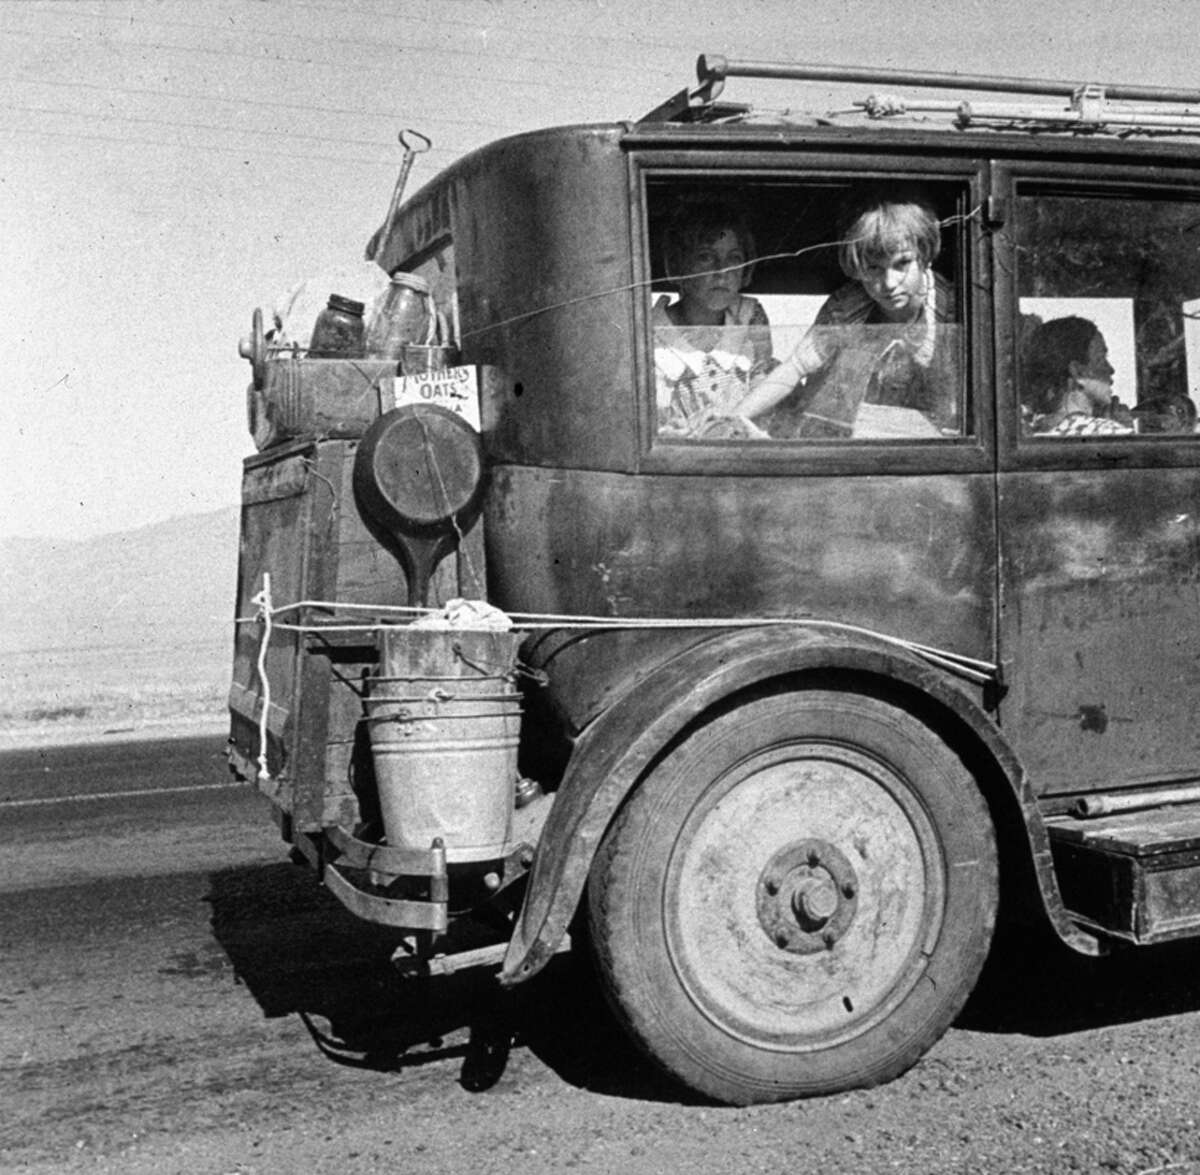 A family of drought refugees from Abilene, Texas, on the road in California, where they are trying to find work. (Photo by Dorothea Lange/Getty Images)